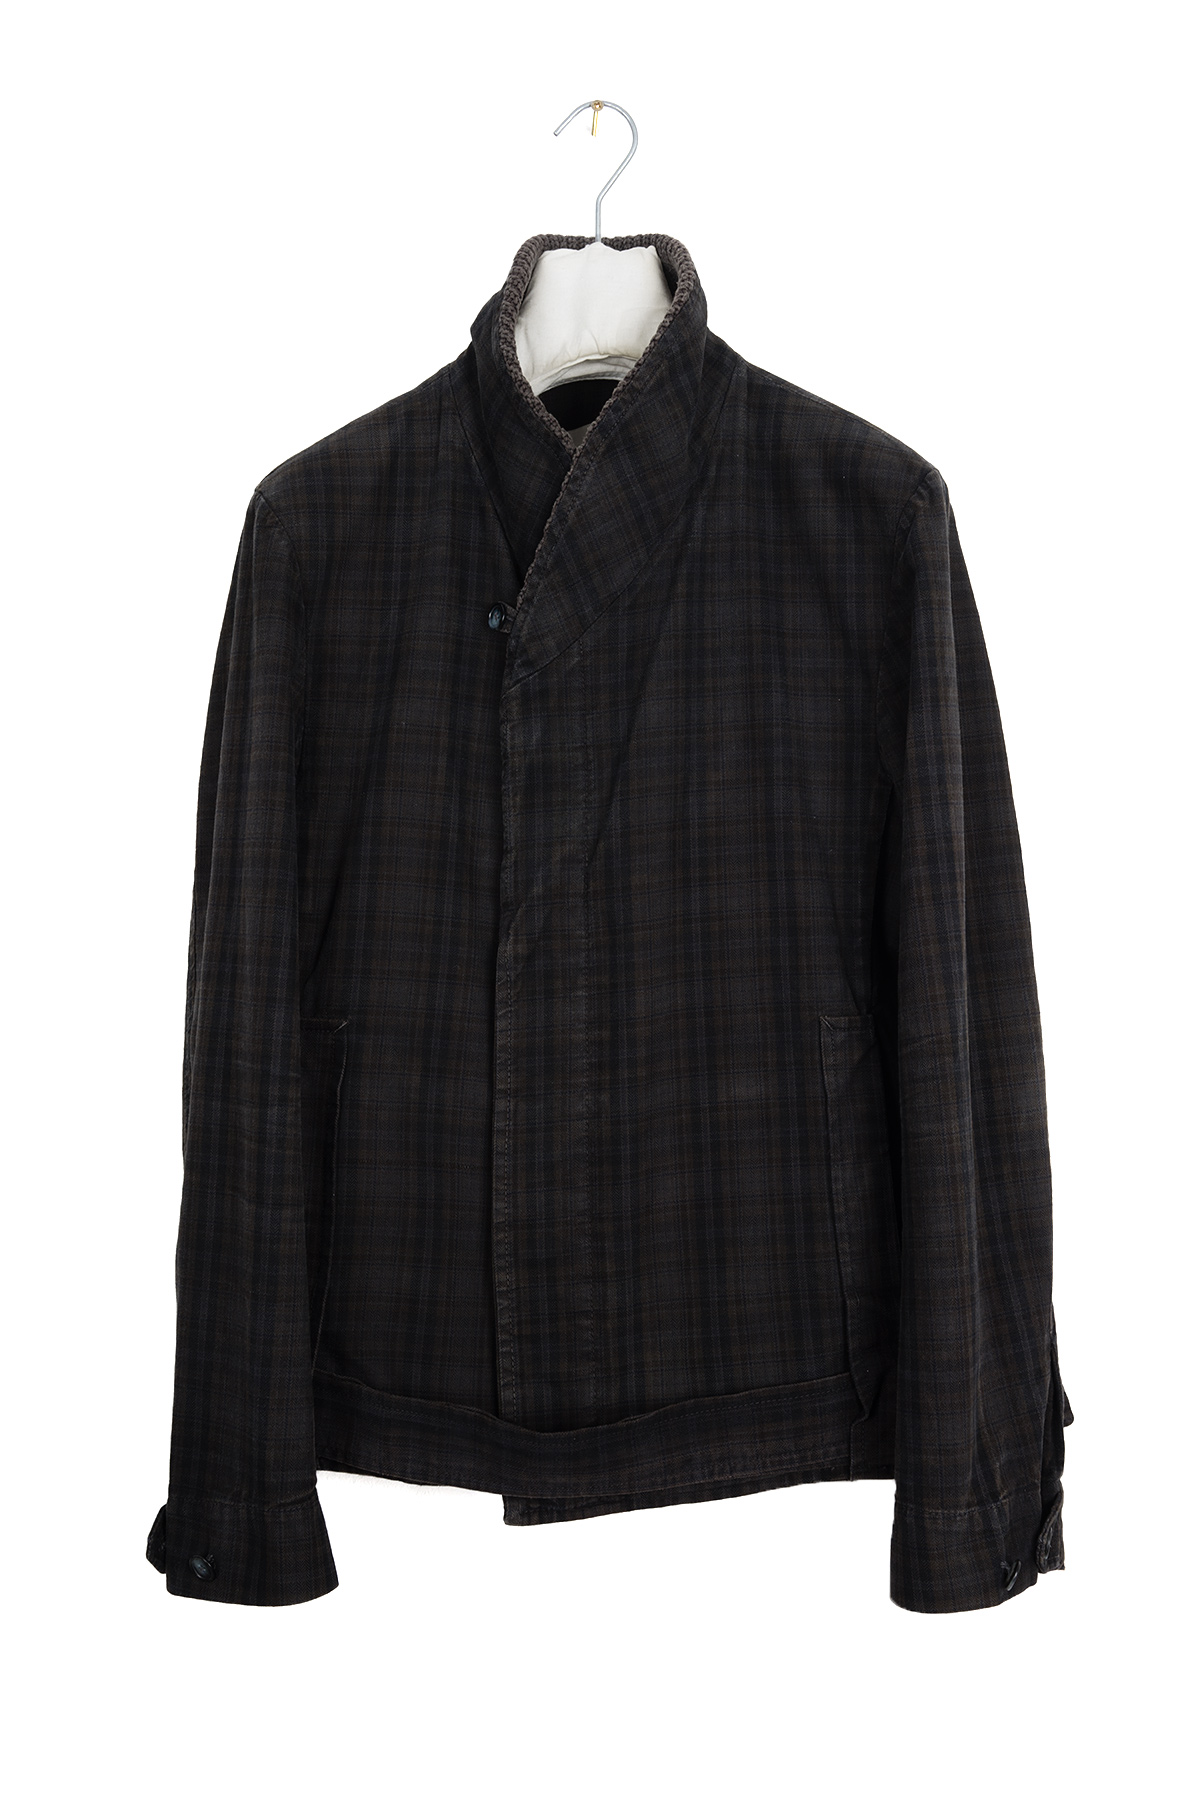 2006 A/W SHAWL COLLAR JACKET IN OVERDYED COTTON - 2